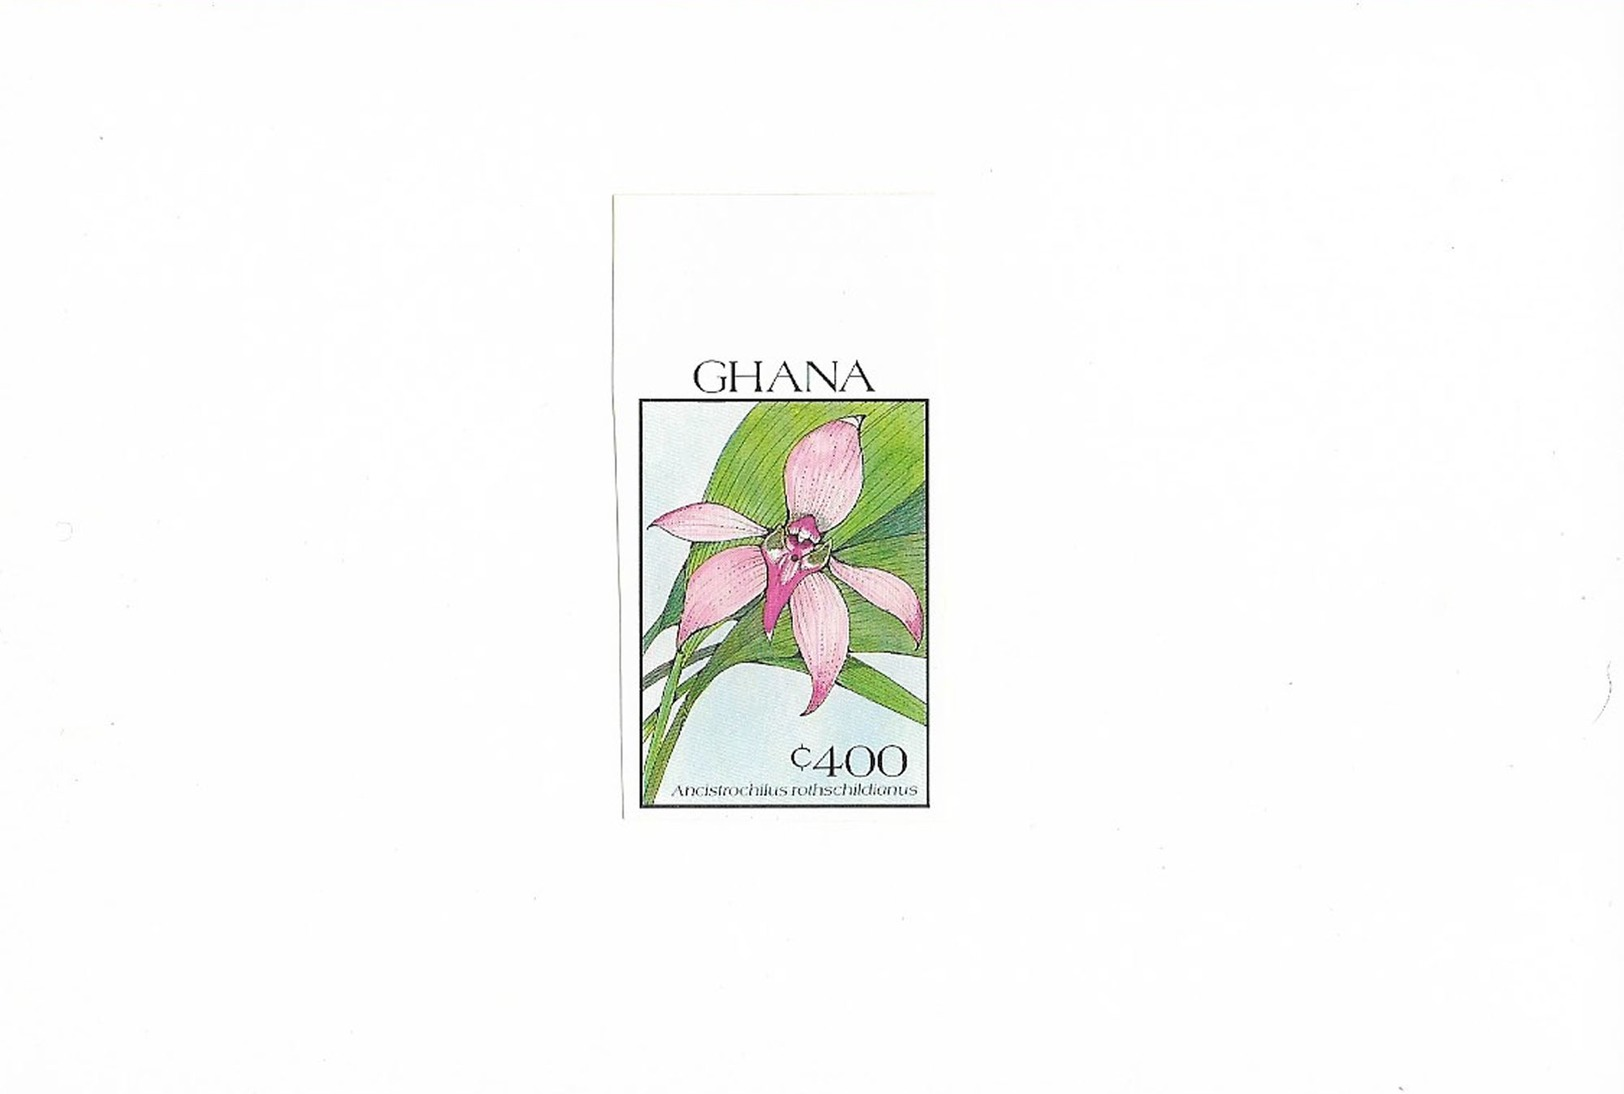 Ref 4 - Ghana 1990 MNH Plants Flowers Orchids Fleurs Orchidées Blumen - Proofs Imperforated Stamps Mounted on Card